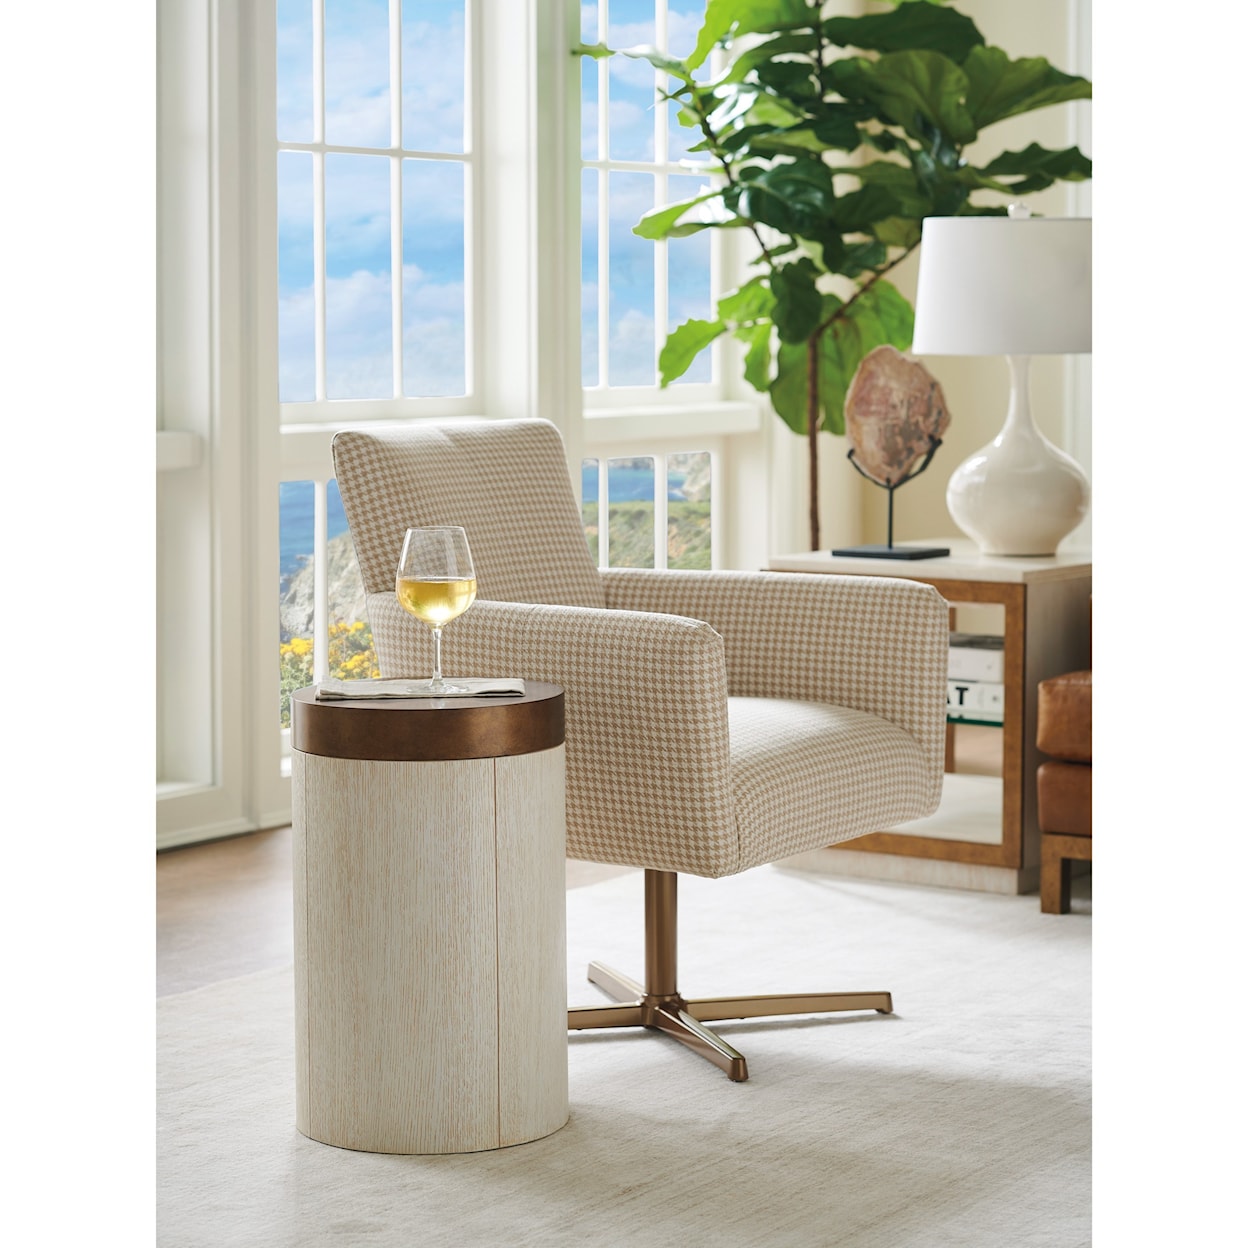 Barclay Butera Carmel Crest Round End Table